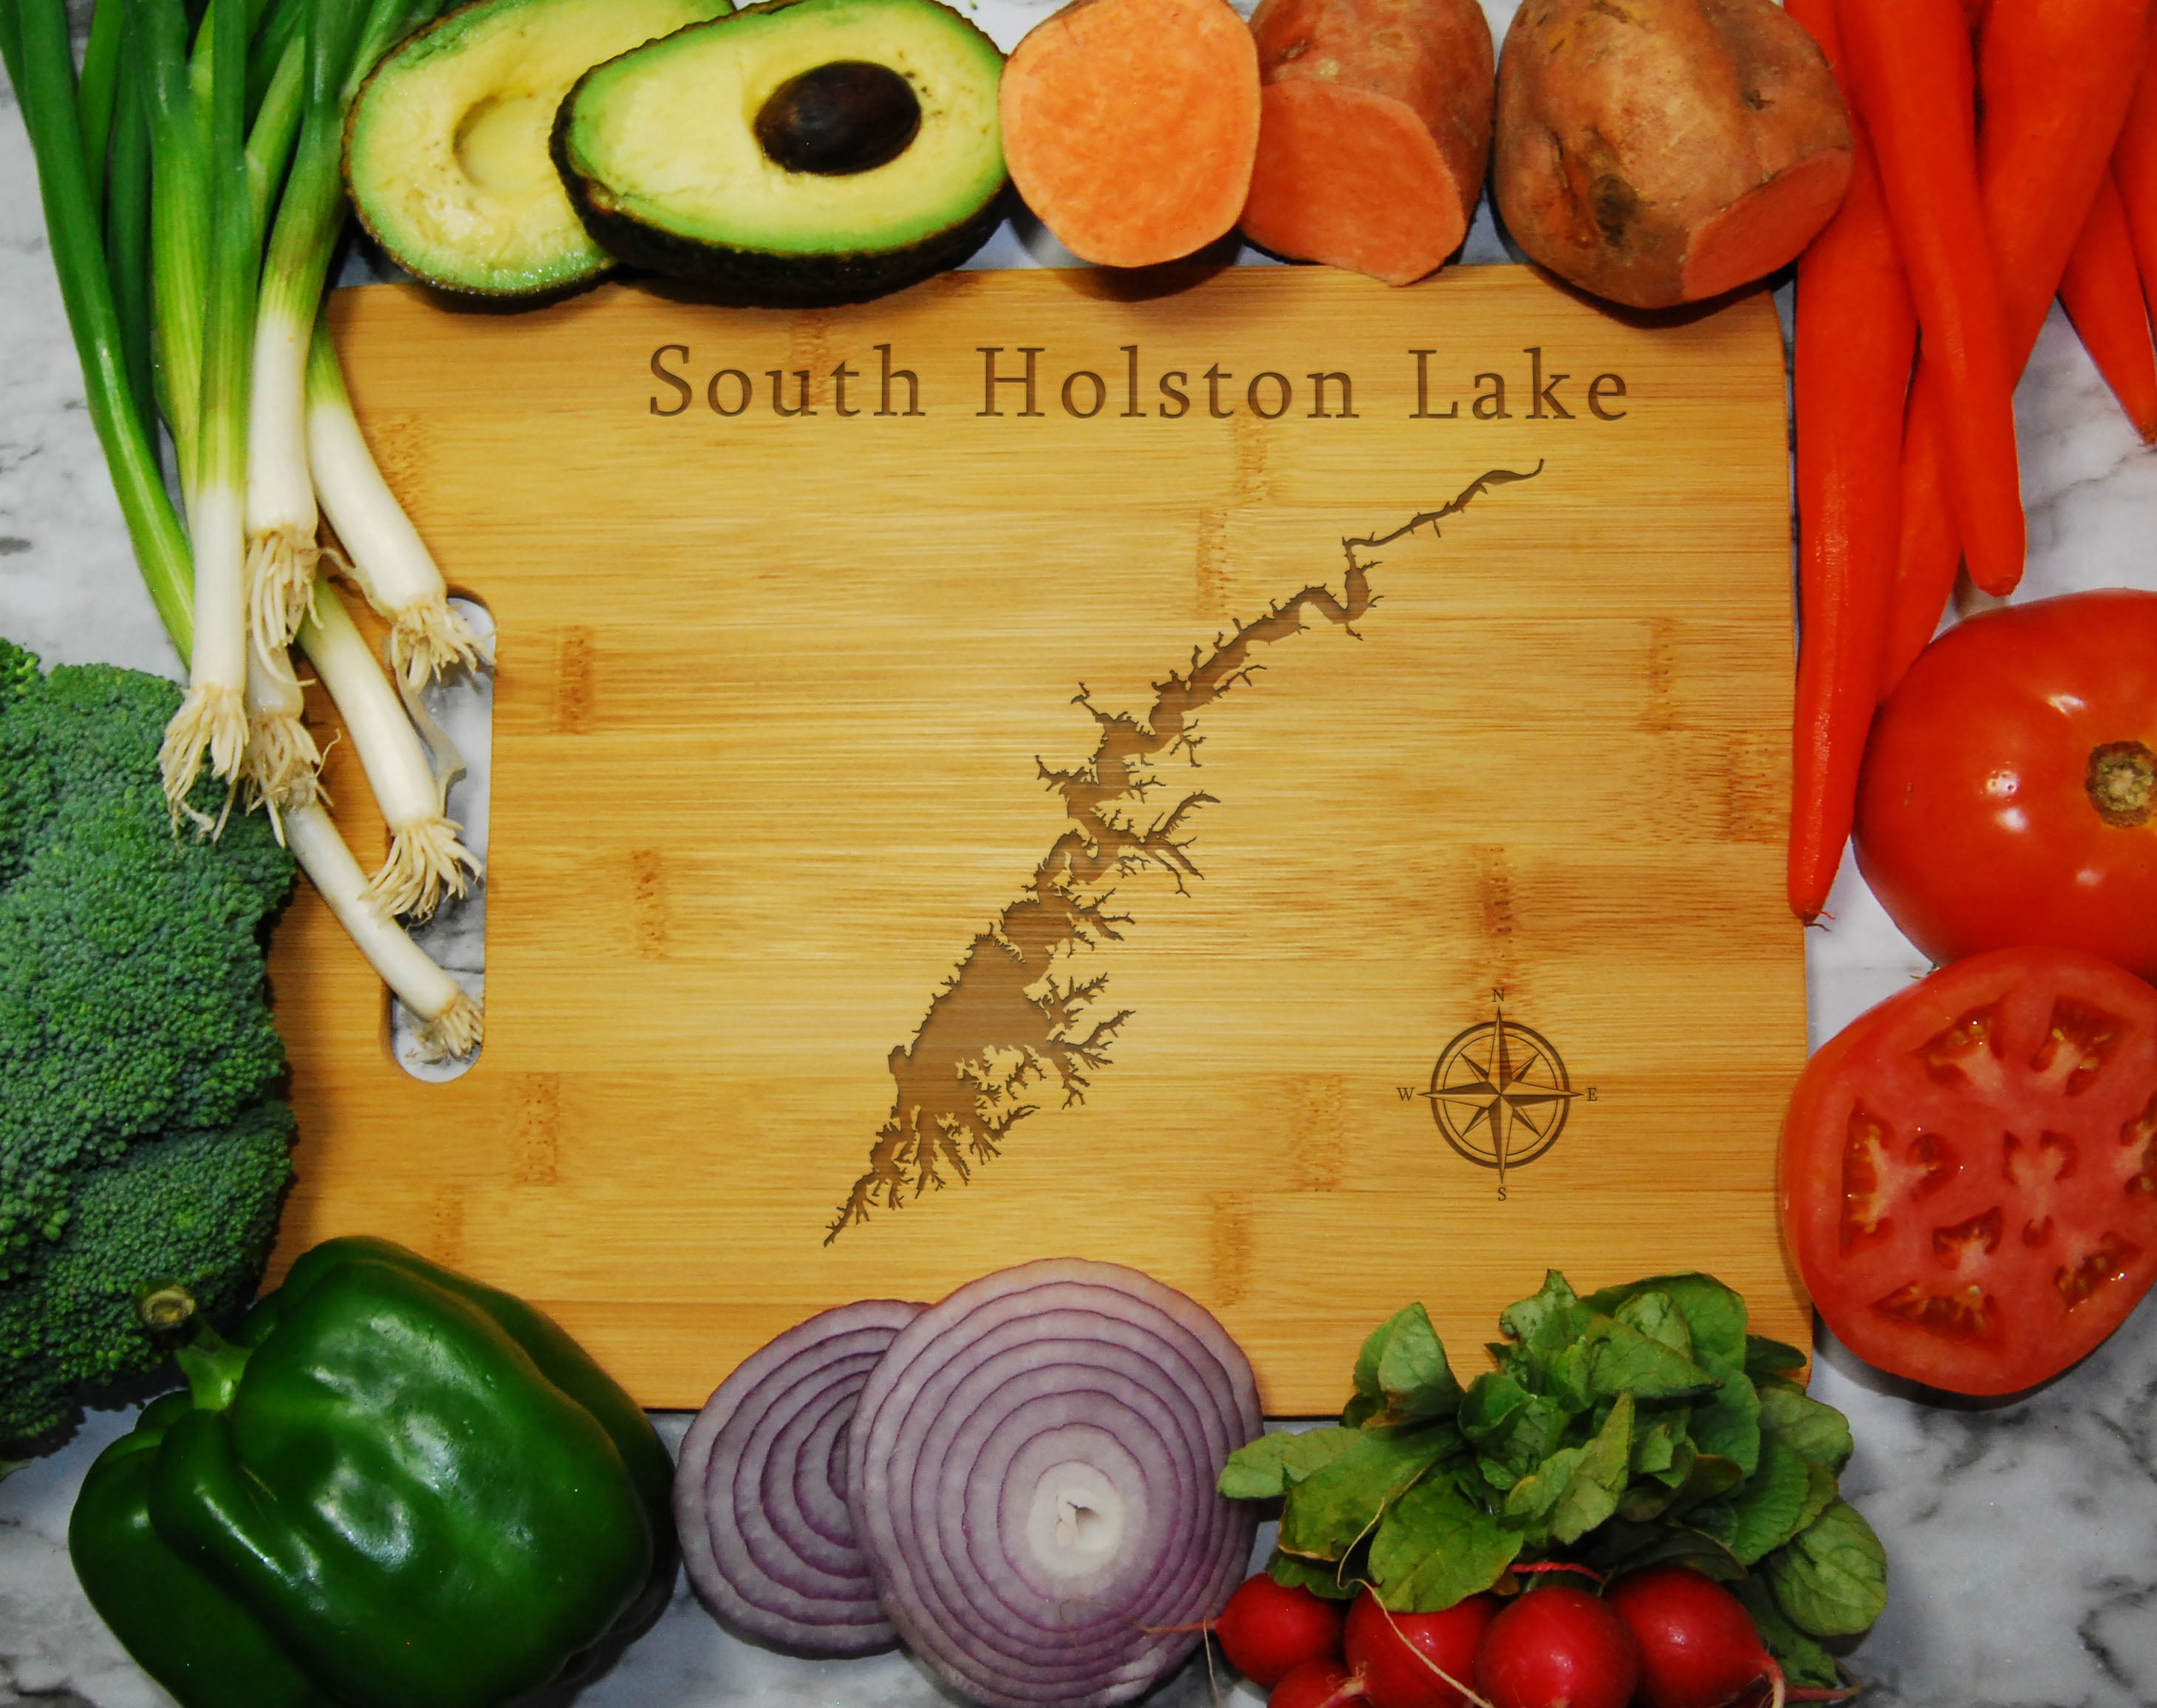 South Holston Lake Map Engraved Bamboo Cutting Board 9.75x13.75 inches Tennessee 